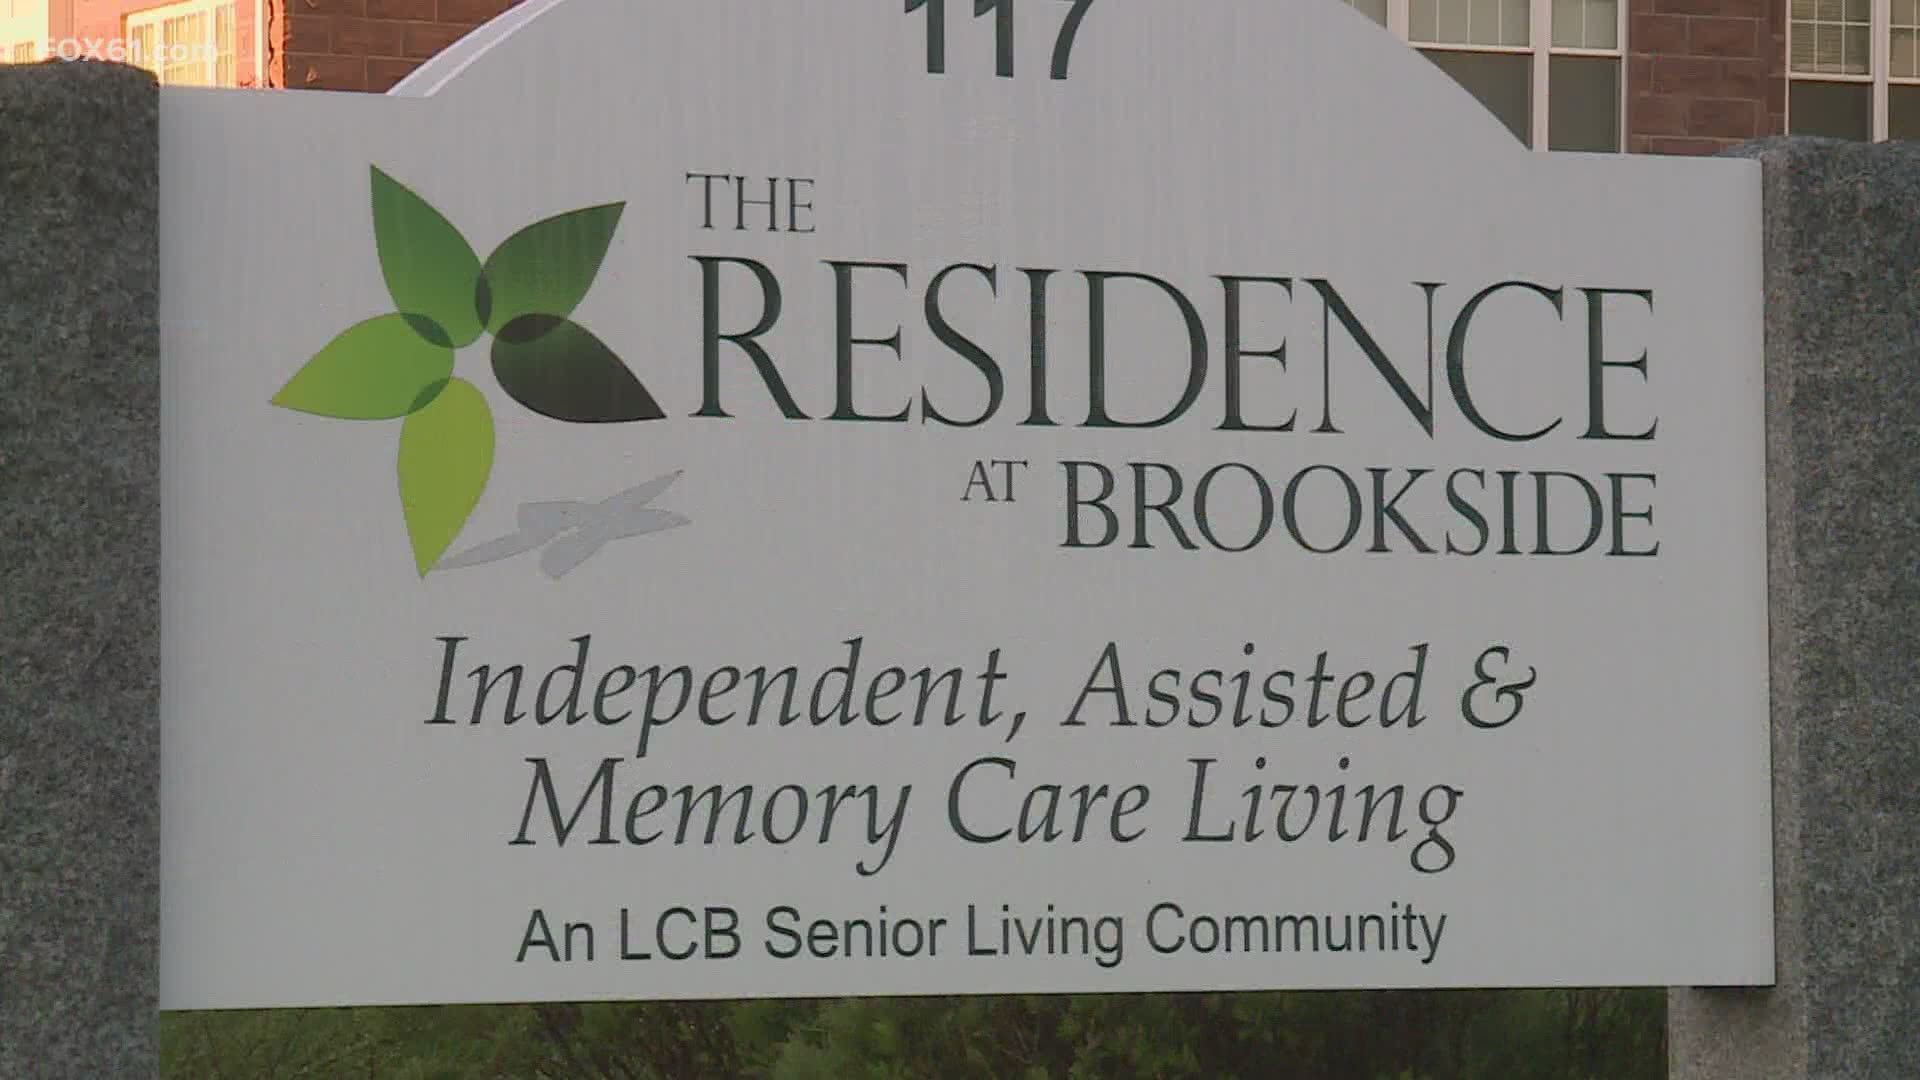 Testing and contact tracing is underway at Avon Health Center and Residence at Brookside after several residents and staff members have tested positive.